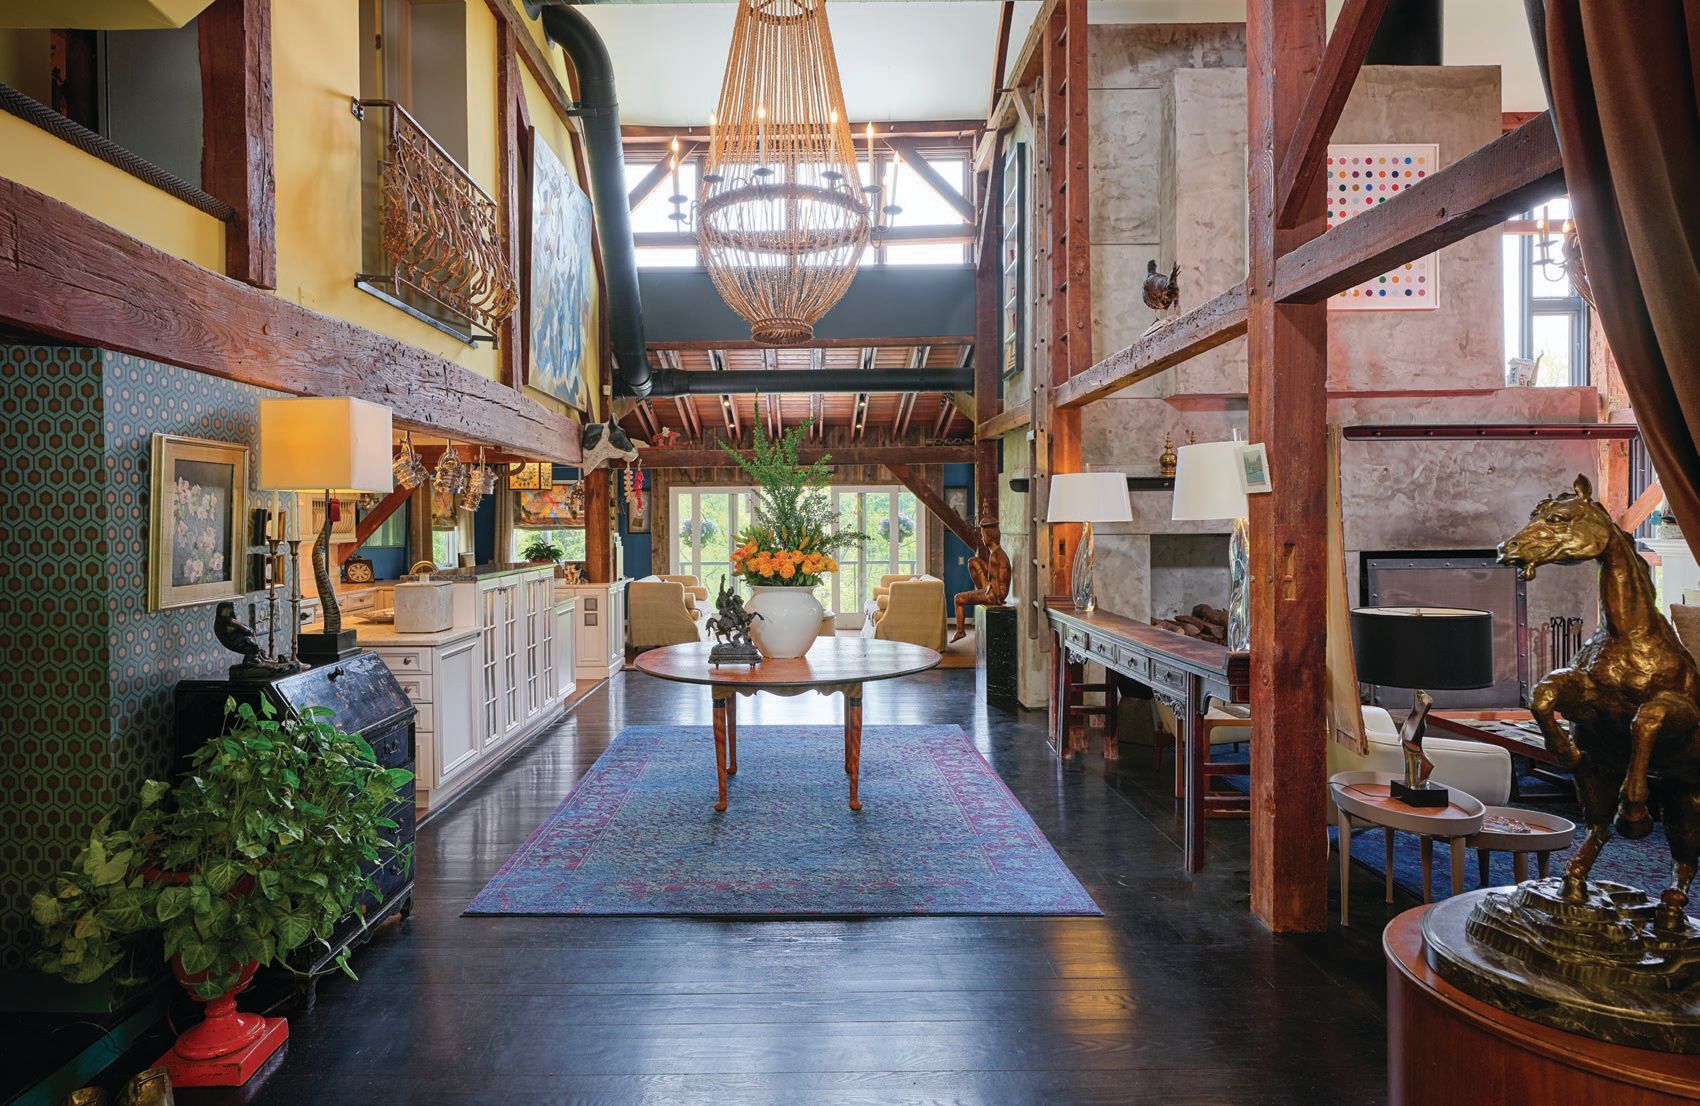 Original wood beams add a rustic, historic touch throughout the home PHOTO BY JUAN VIDAL PHOTOGRAPHY